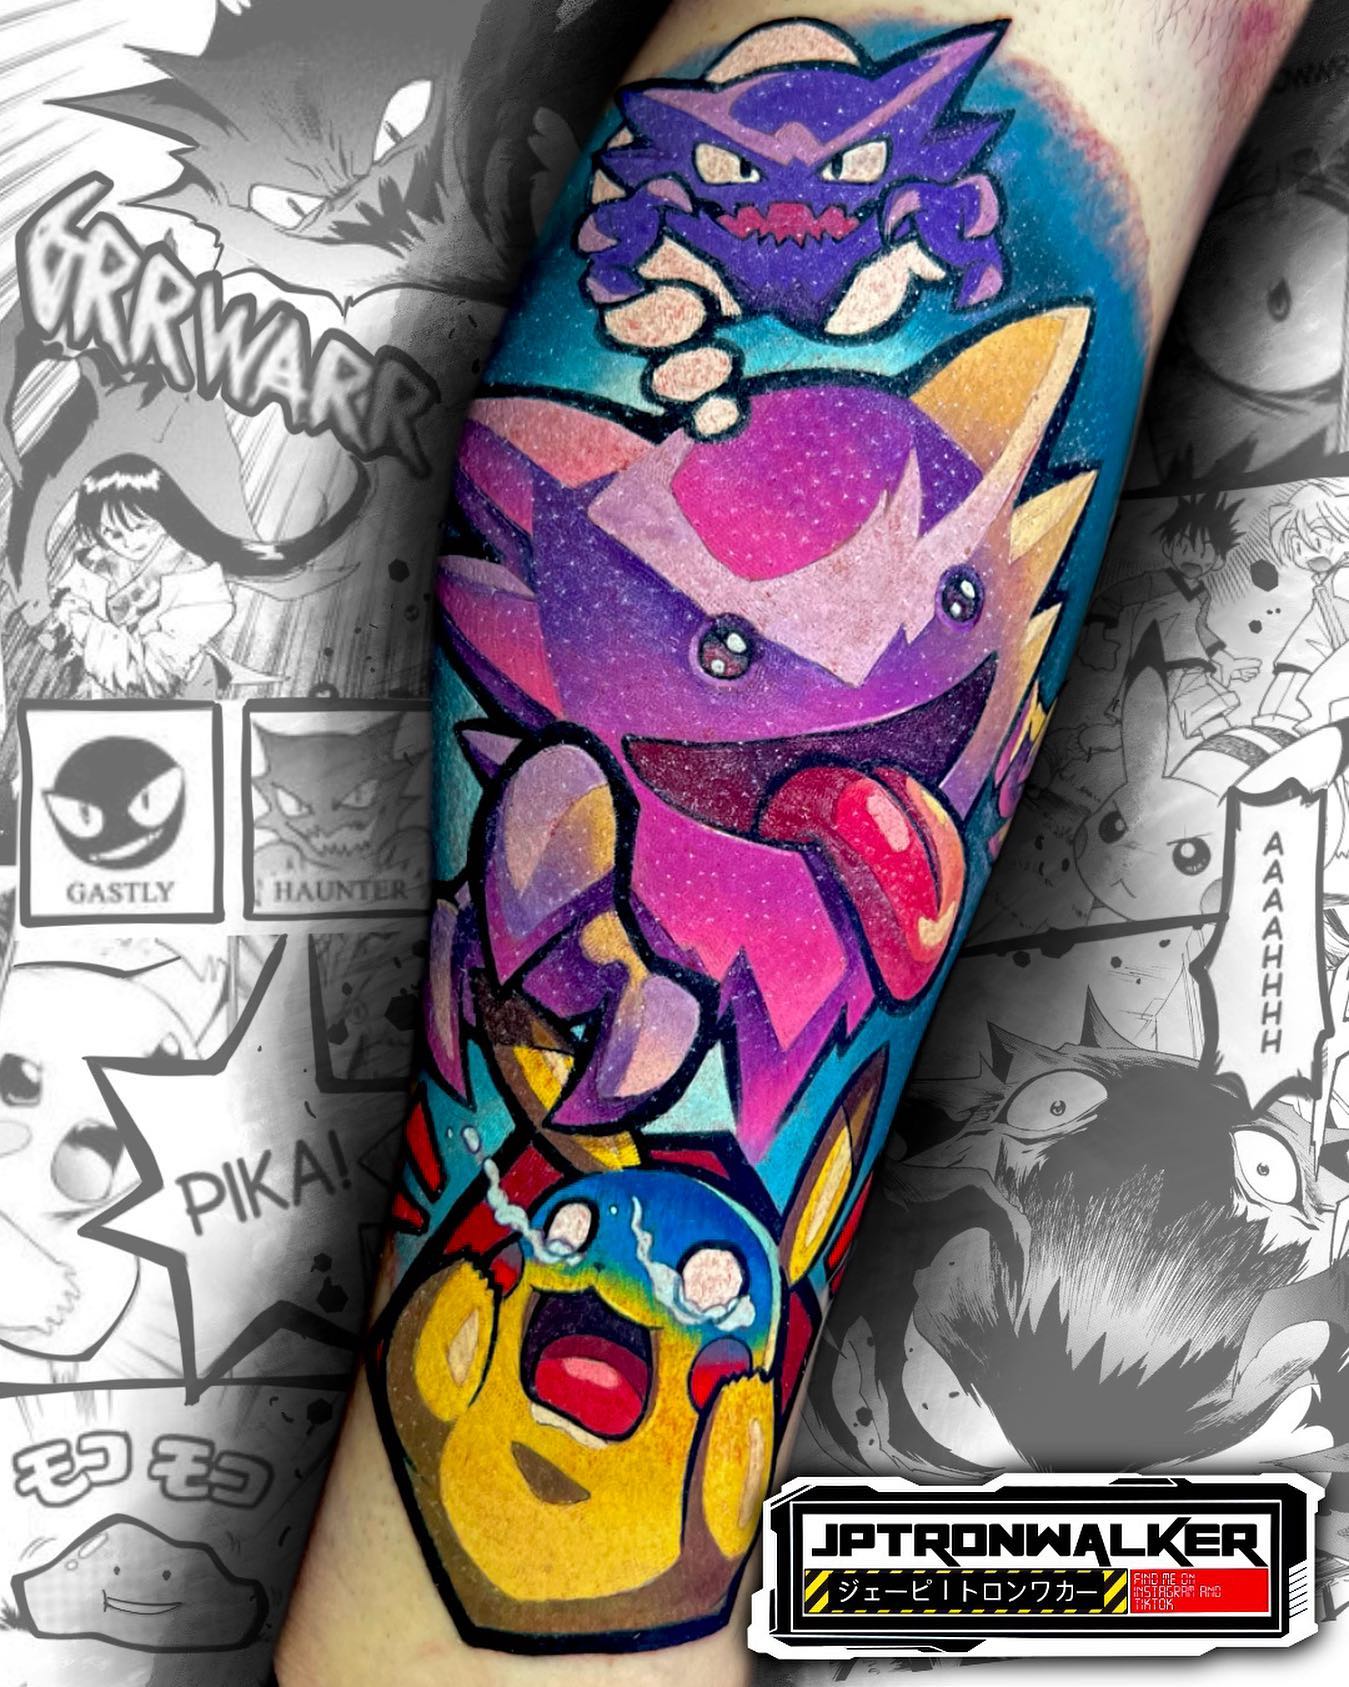 Covering your lower leg may sound something scary but it is easier if you want to cover it up with Pokemon characters. Ditto, Haunter and Pikachu combination will take your tattoo to a whole different level!